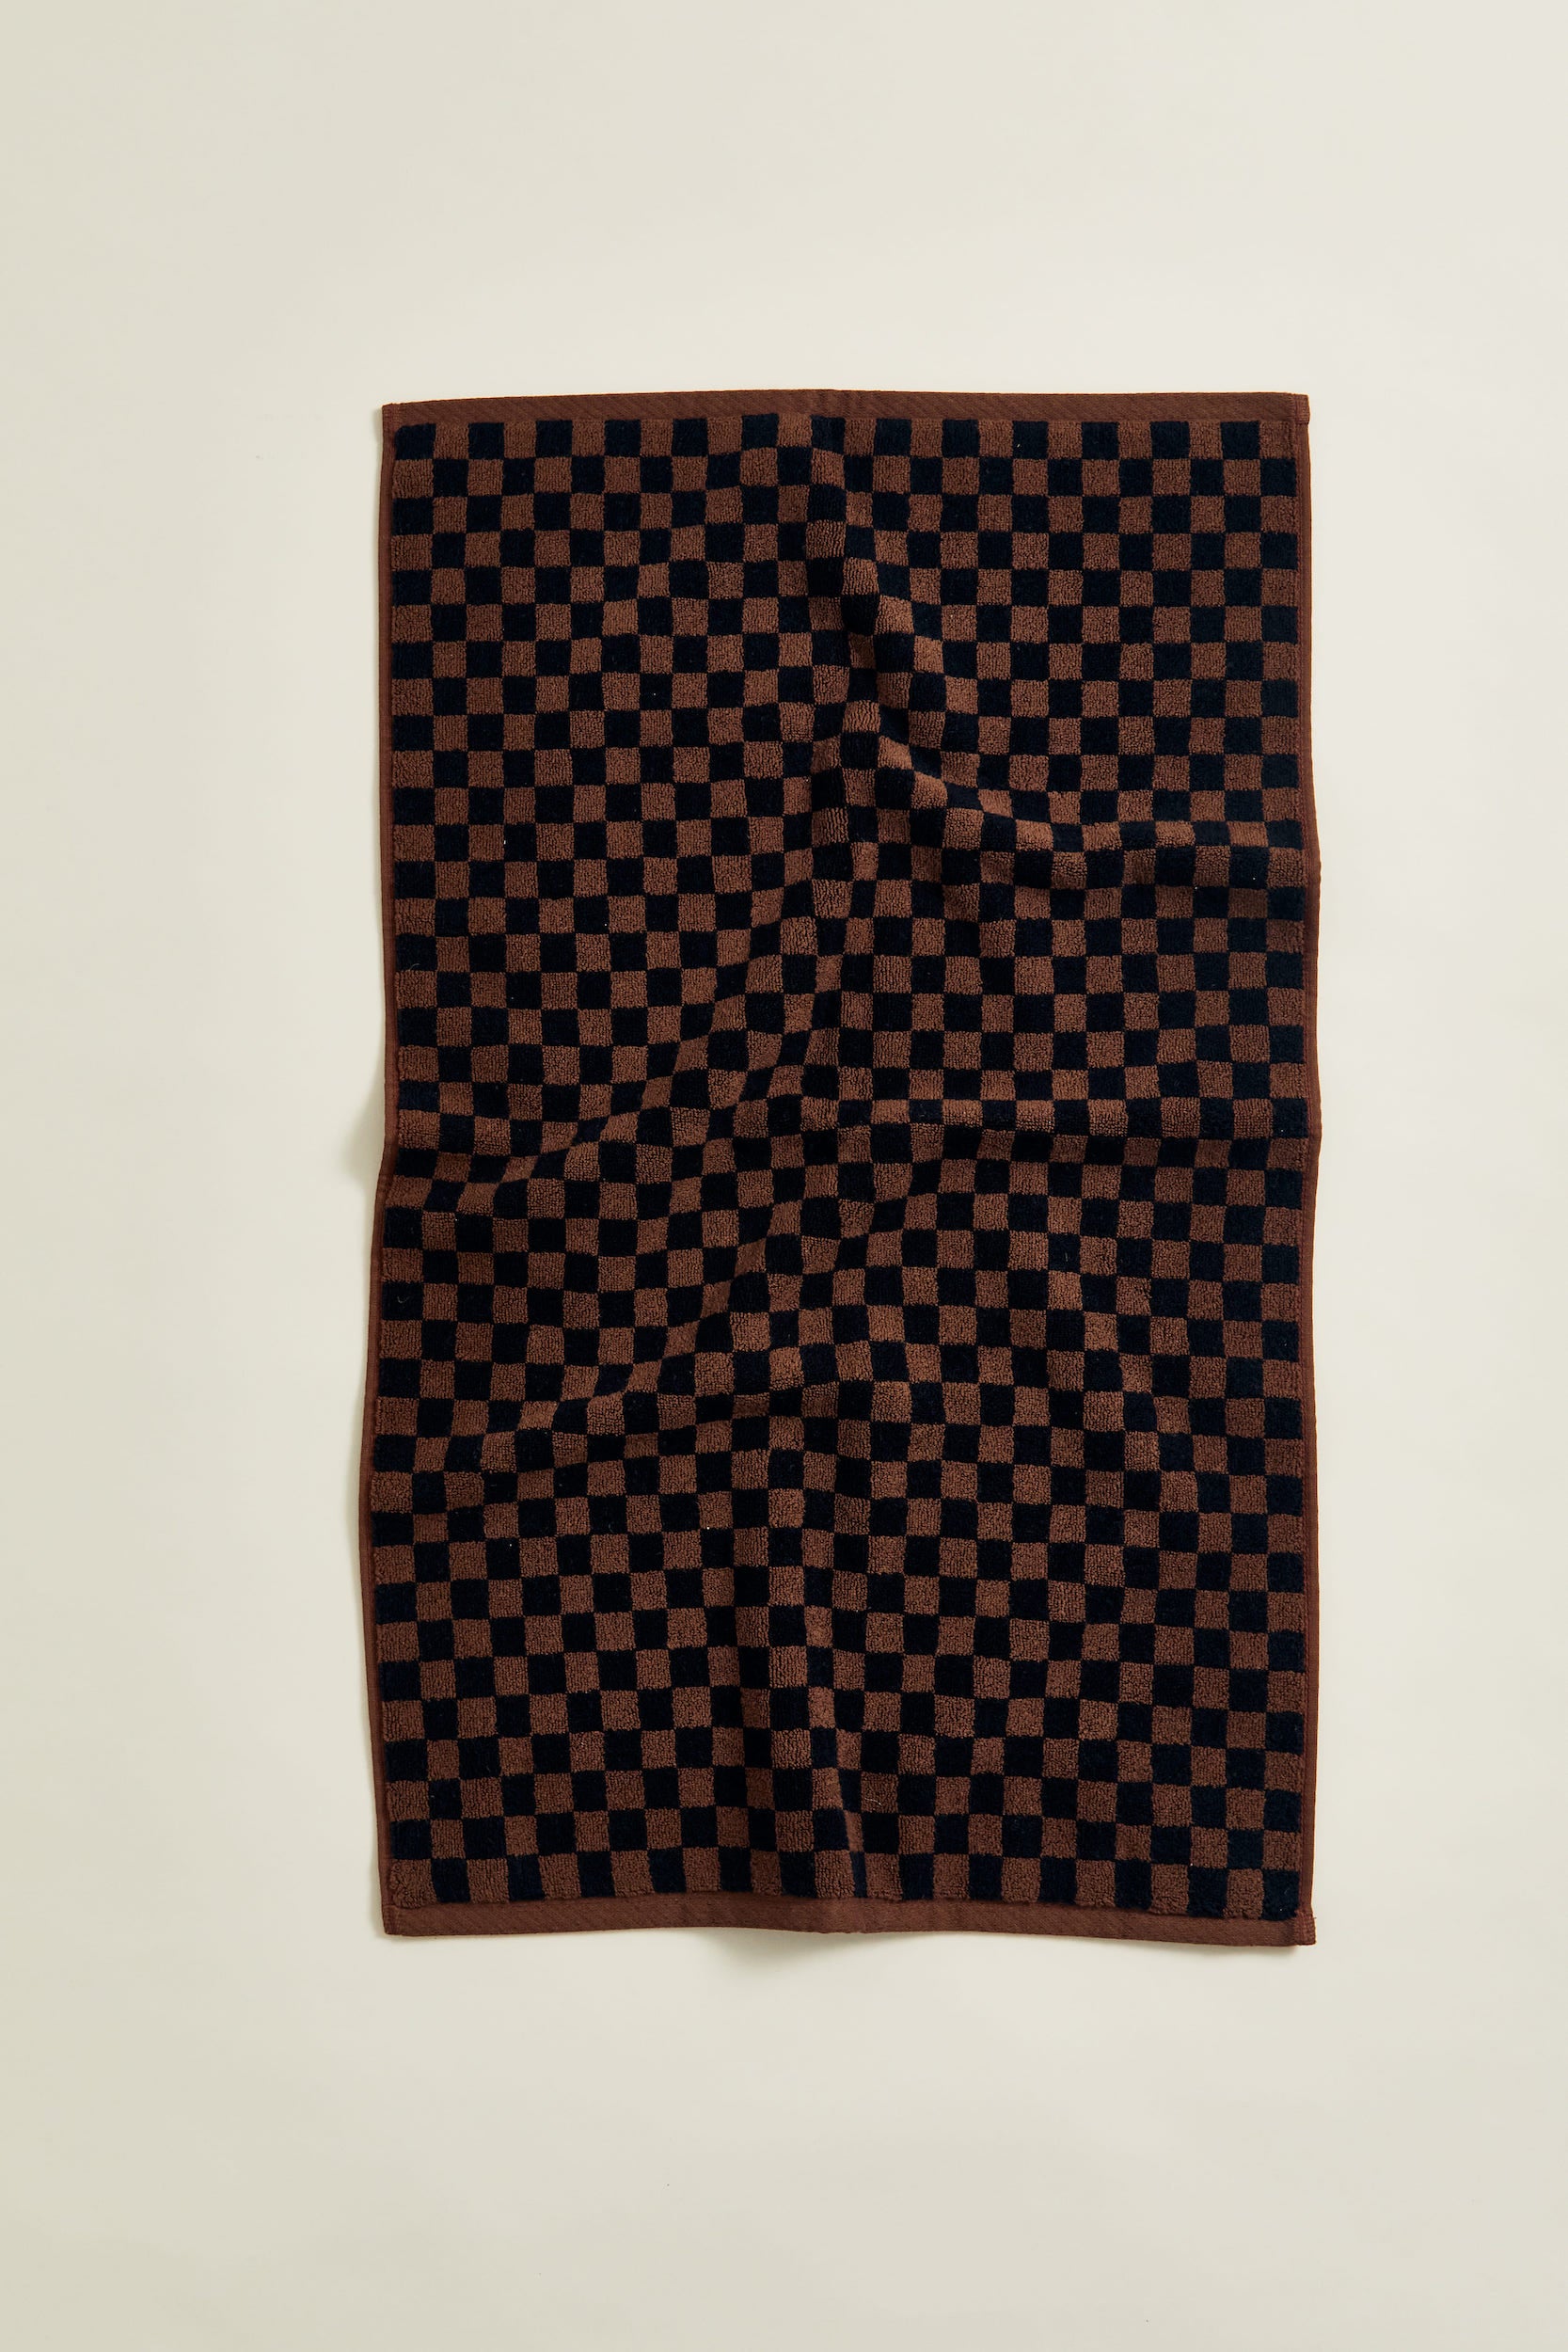 Beppu Organic Cotton Bath Mat in Tabac & Noir. An elevated, everyday bathroom essential with a heritage checkerboard print in brown and black that enriches the bathroom with a luxuriously soft, 100% organic cotton hand. 